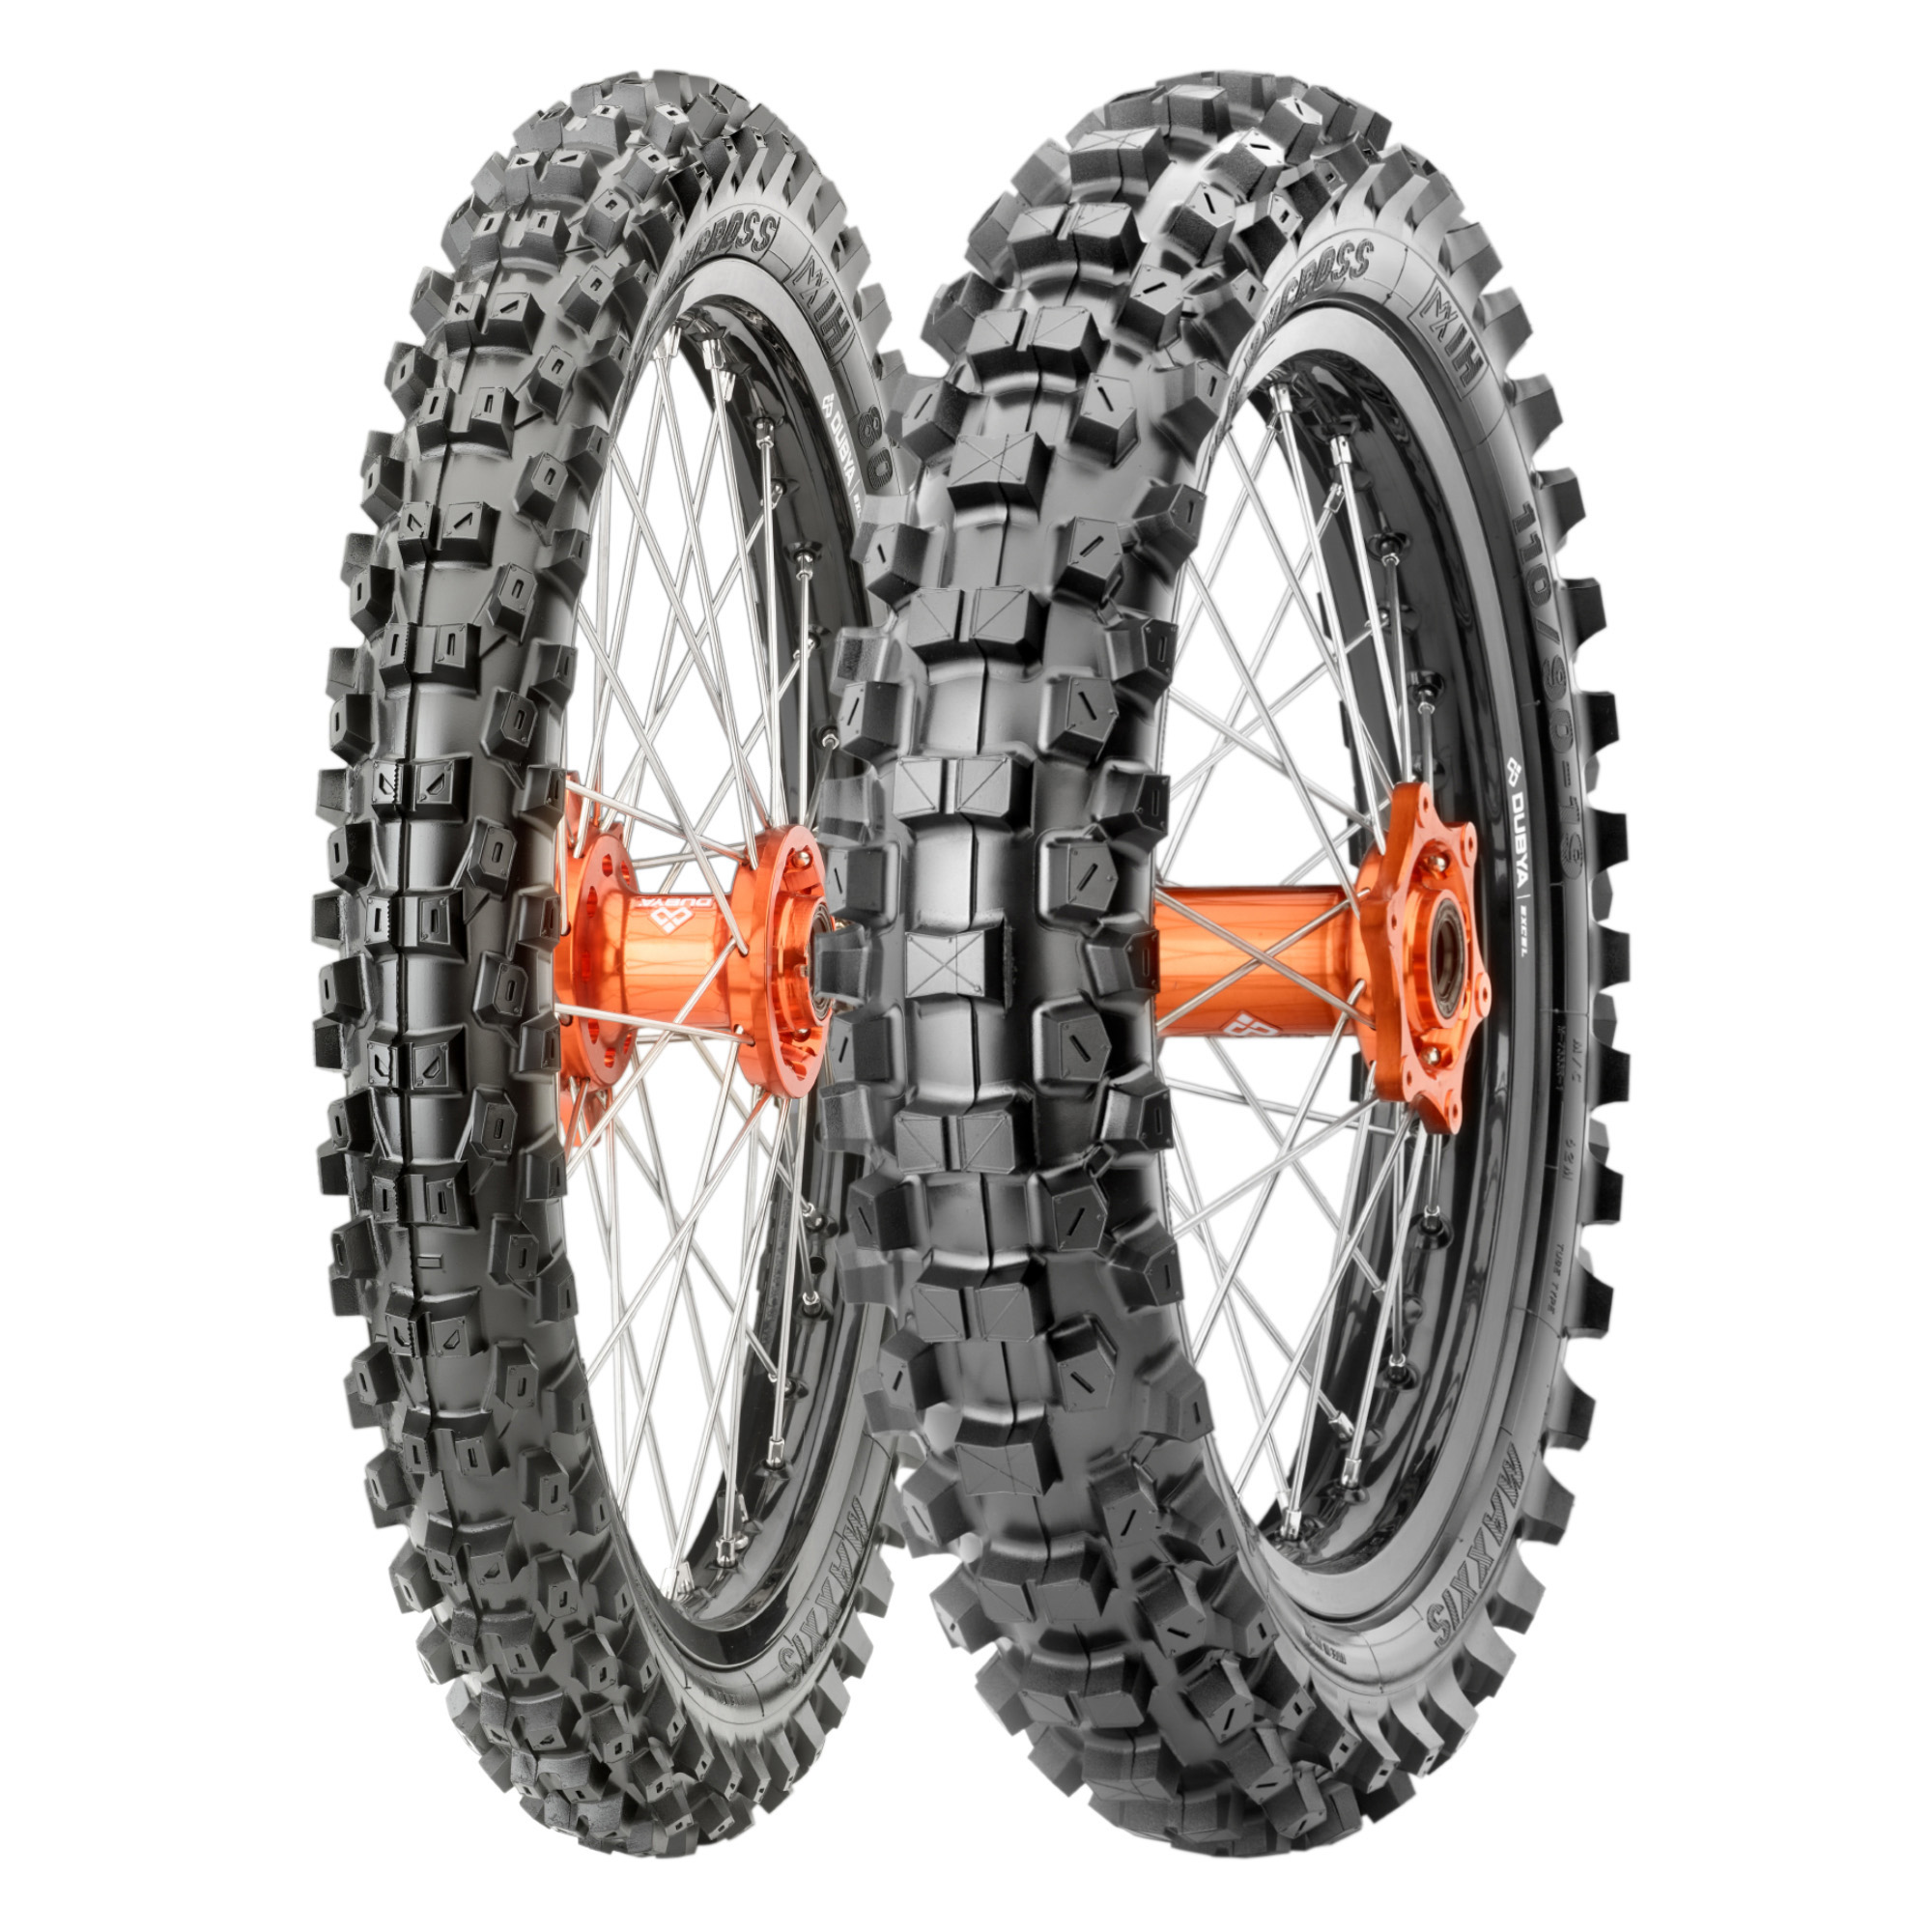 Extreme Off-Road - MAXXIS International